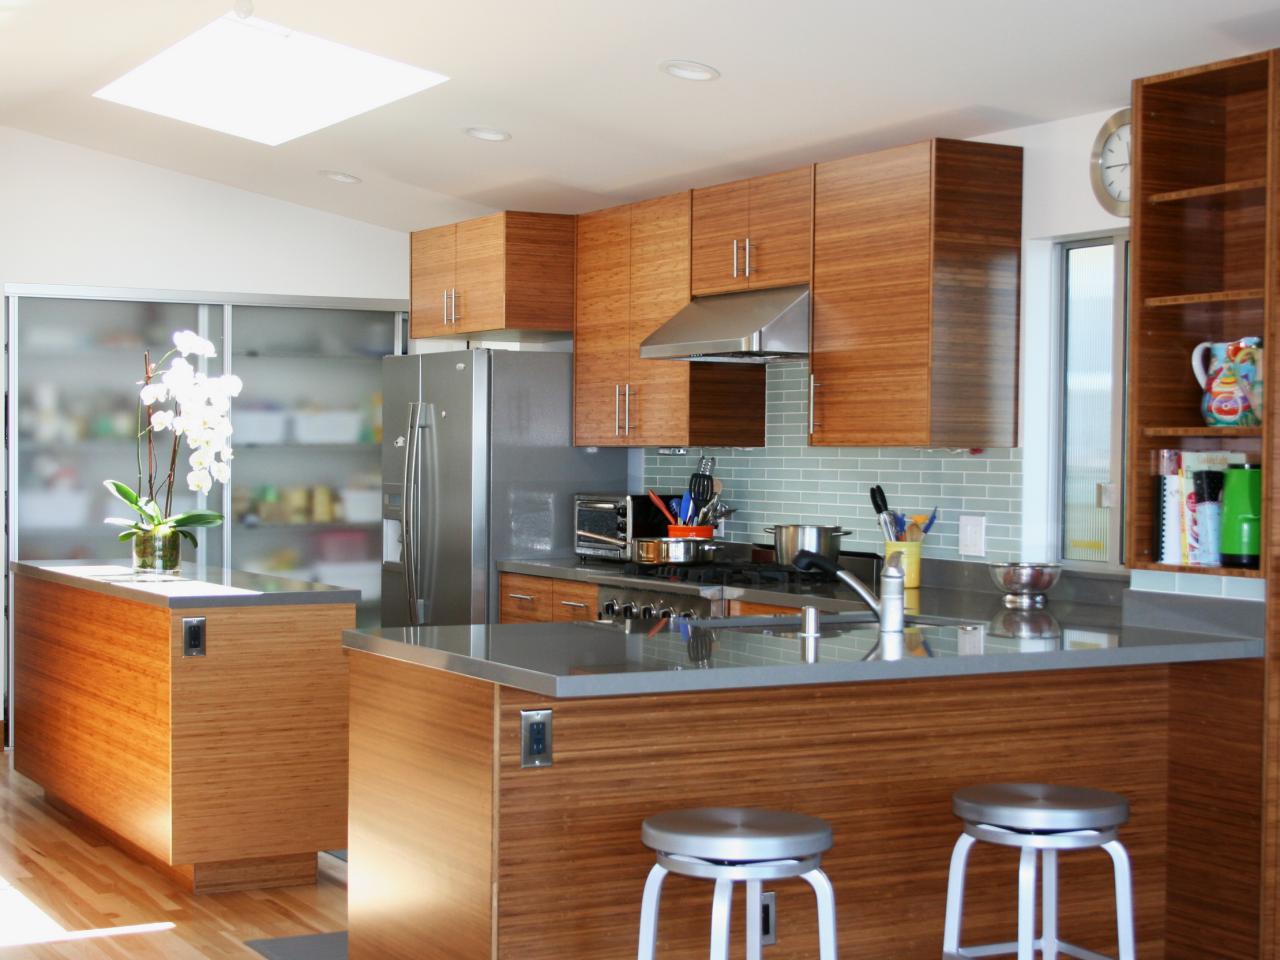 Bamboo Kitchen Cabinets Pictures, Teak Kitchen Cabinets Cost